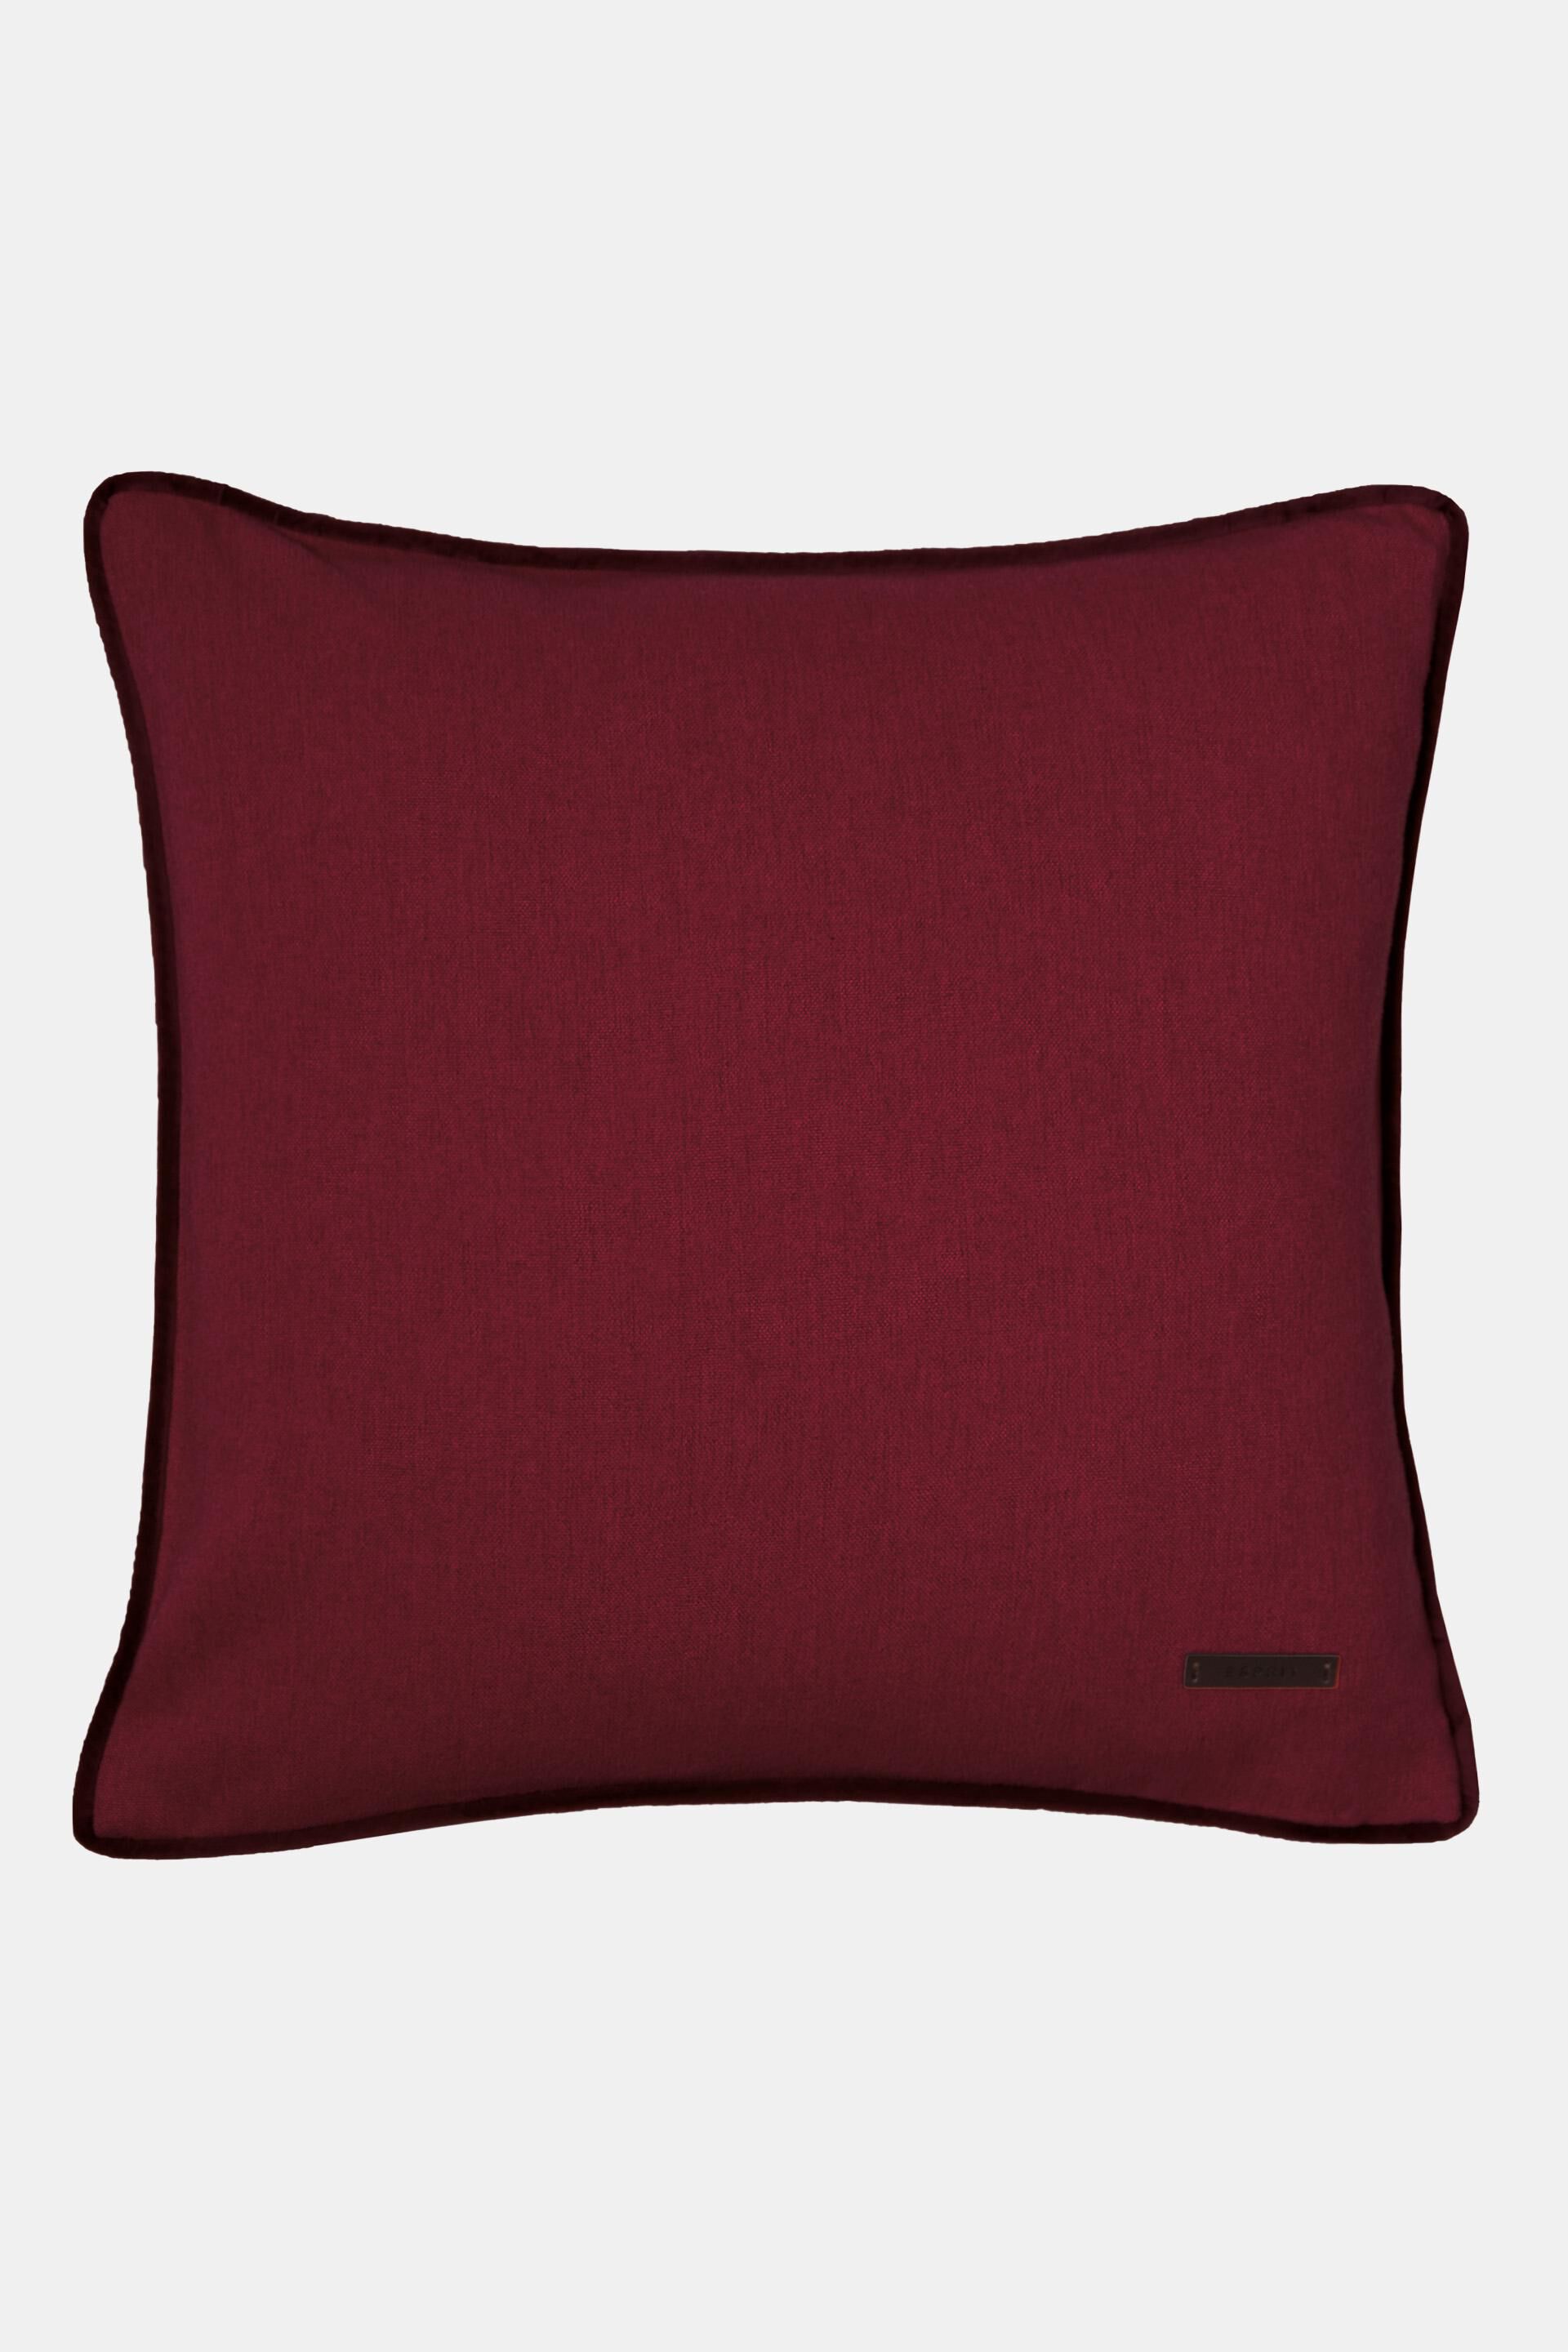 Esprit Decorative velvet piping with cover cushion